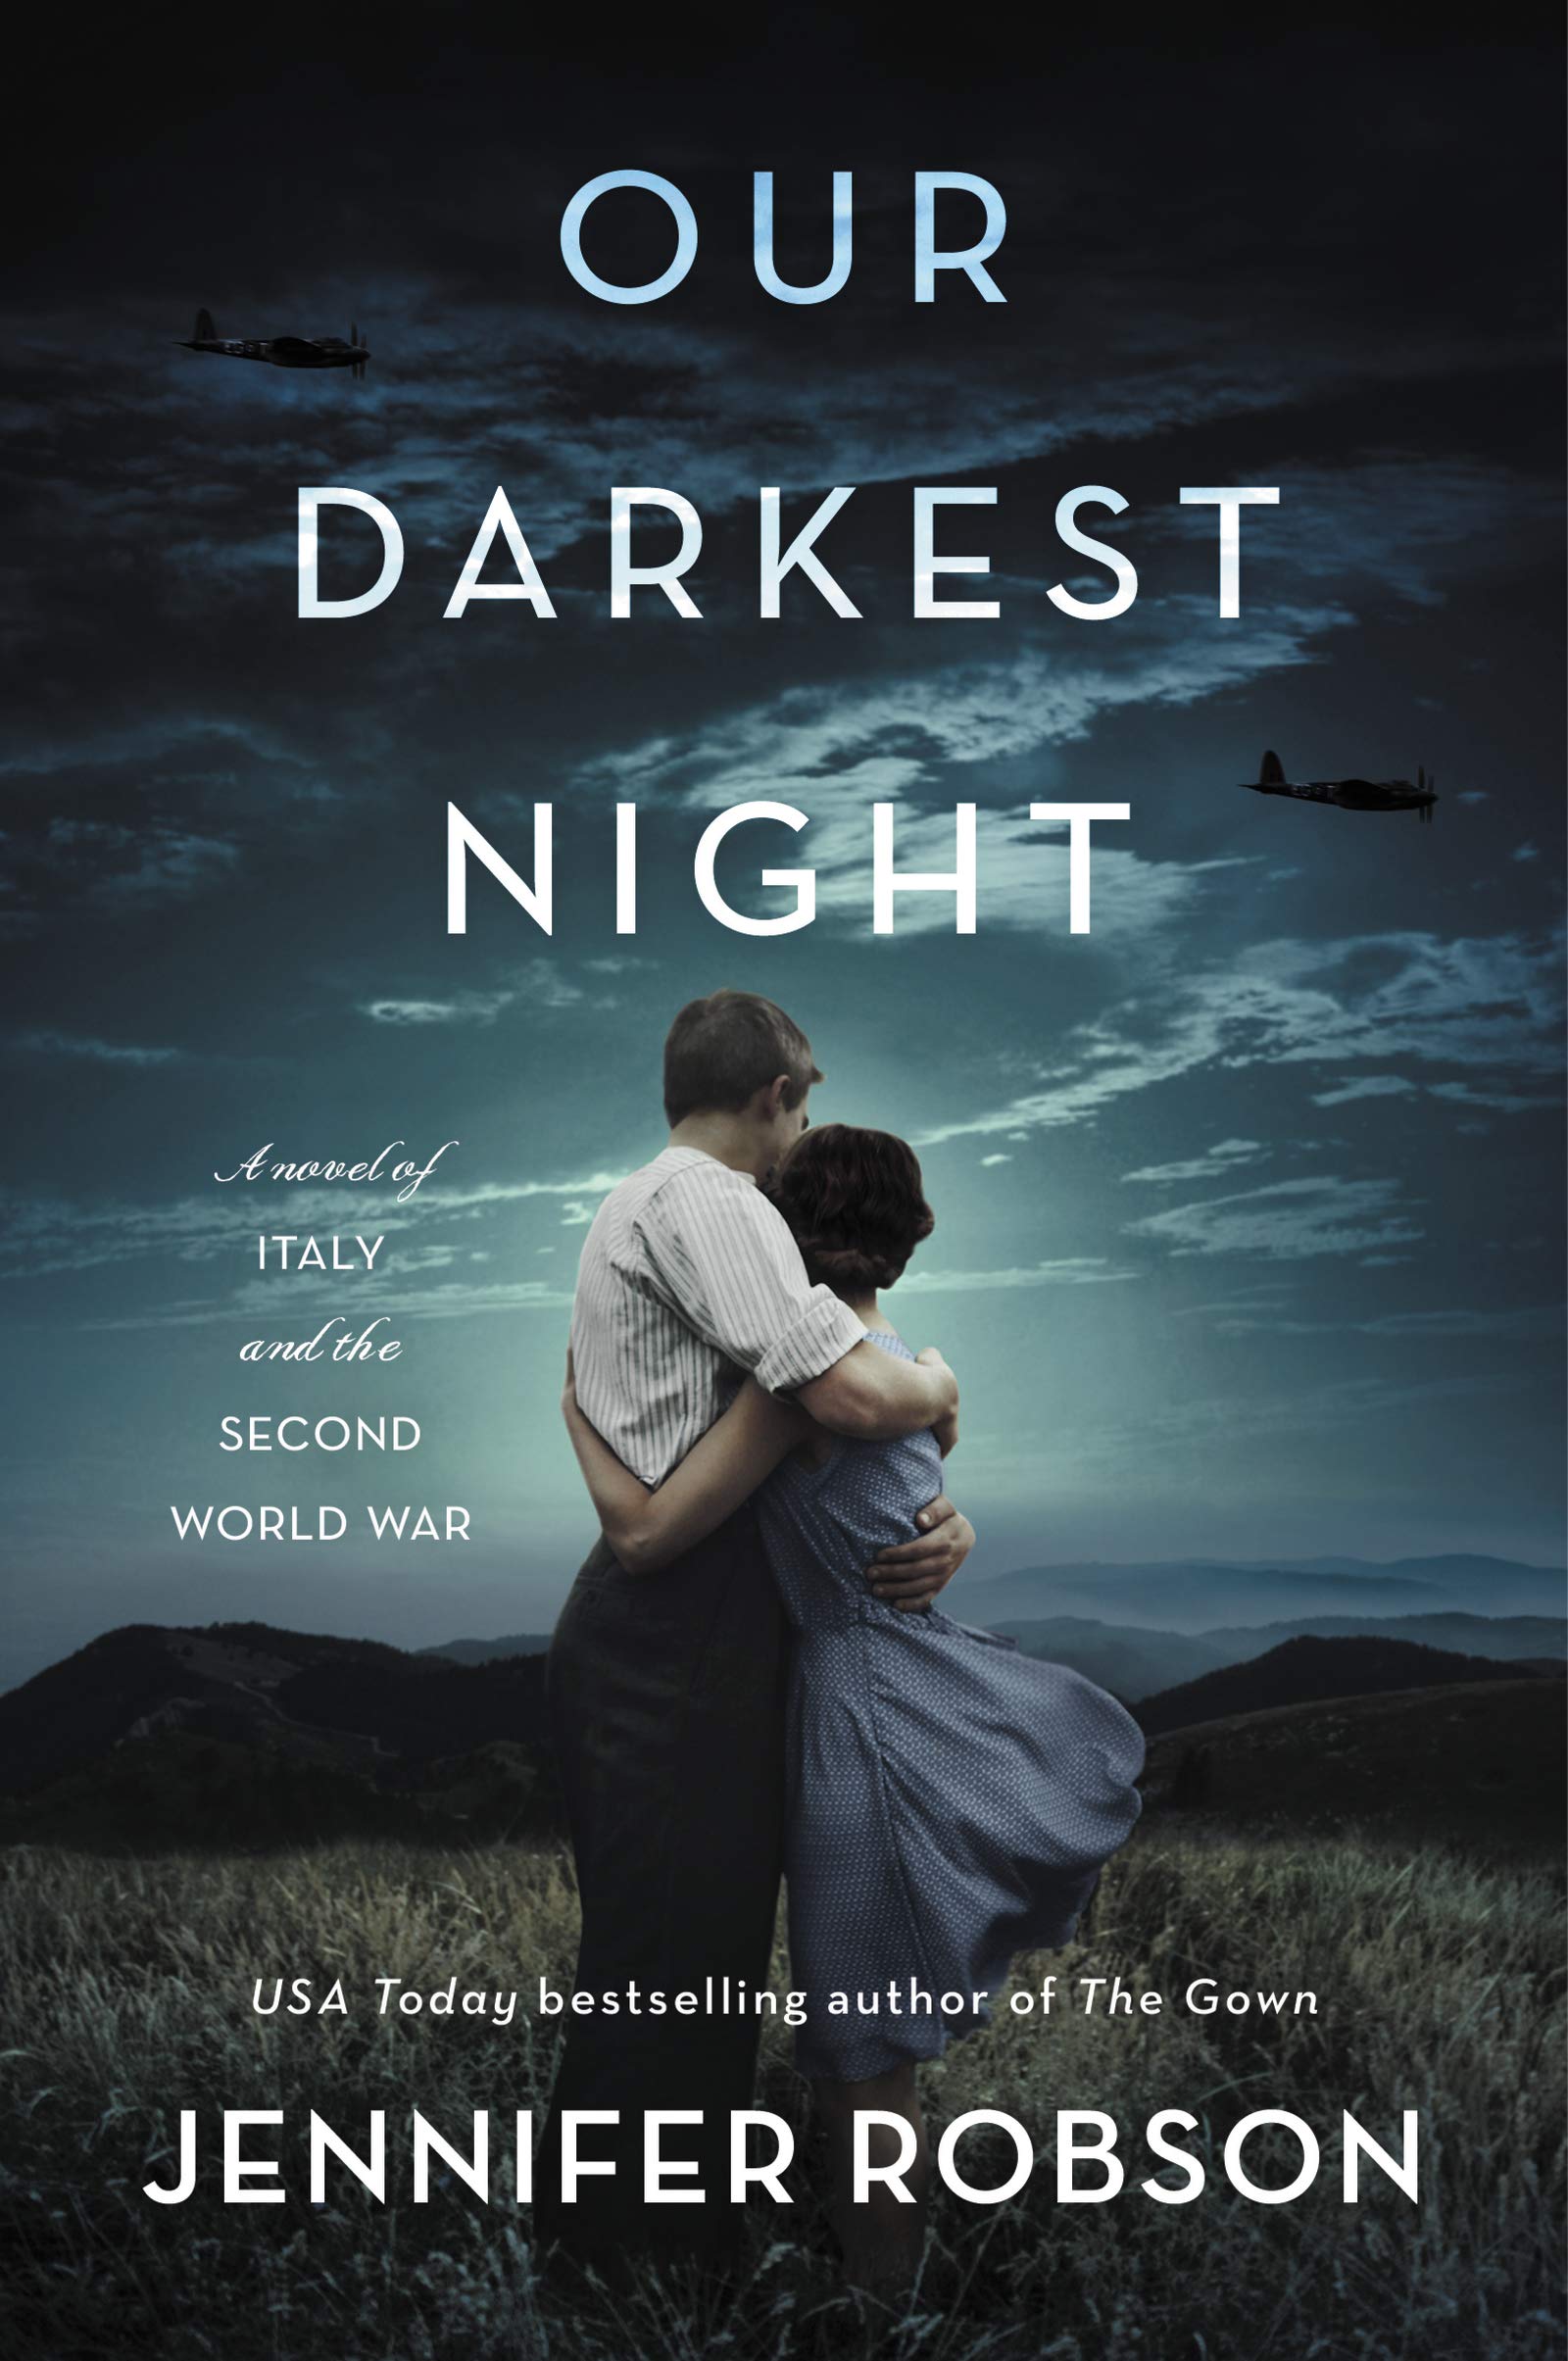 Image for "Our Darkest Night"